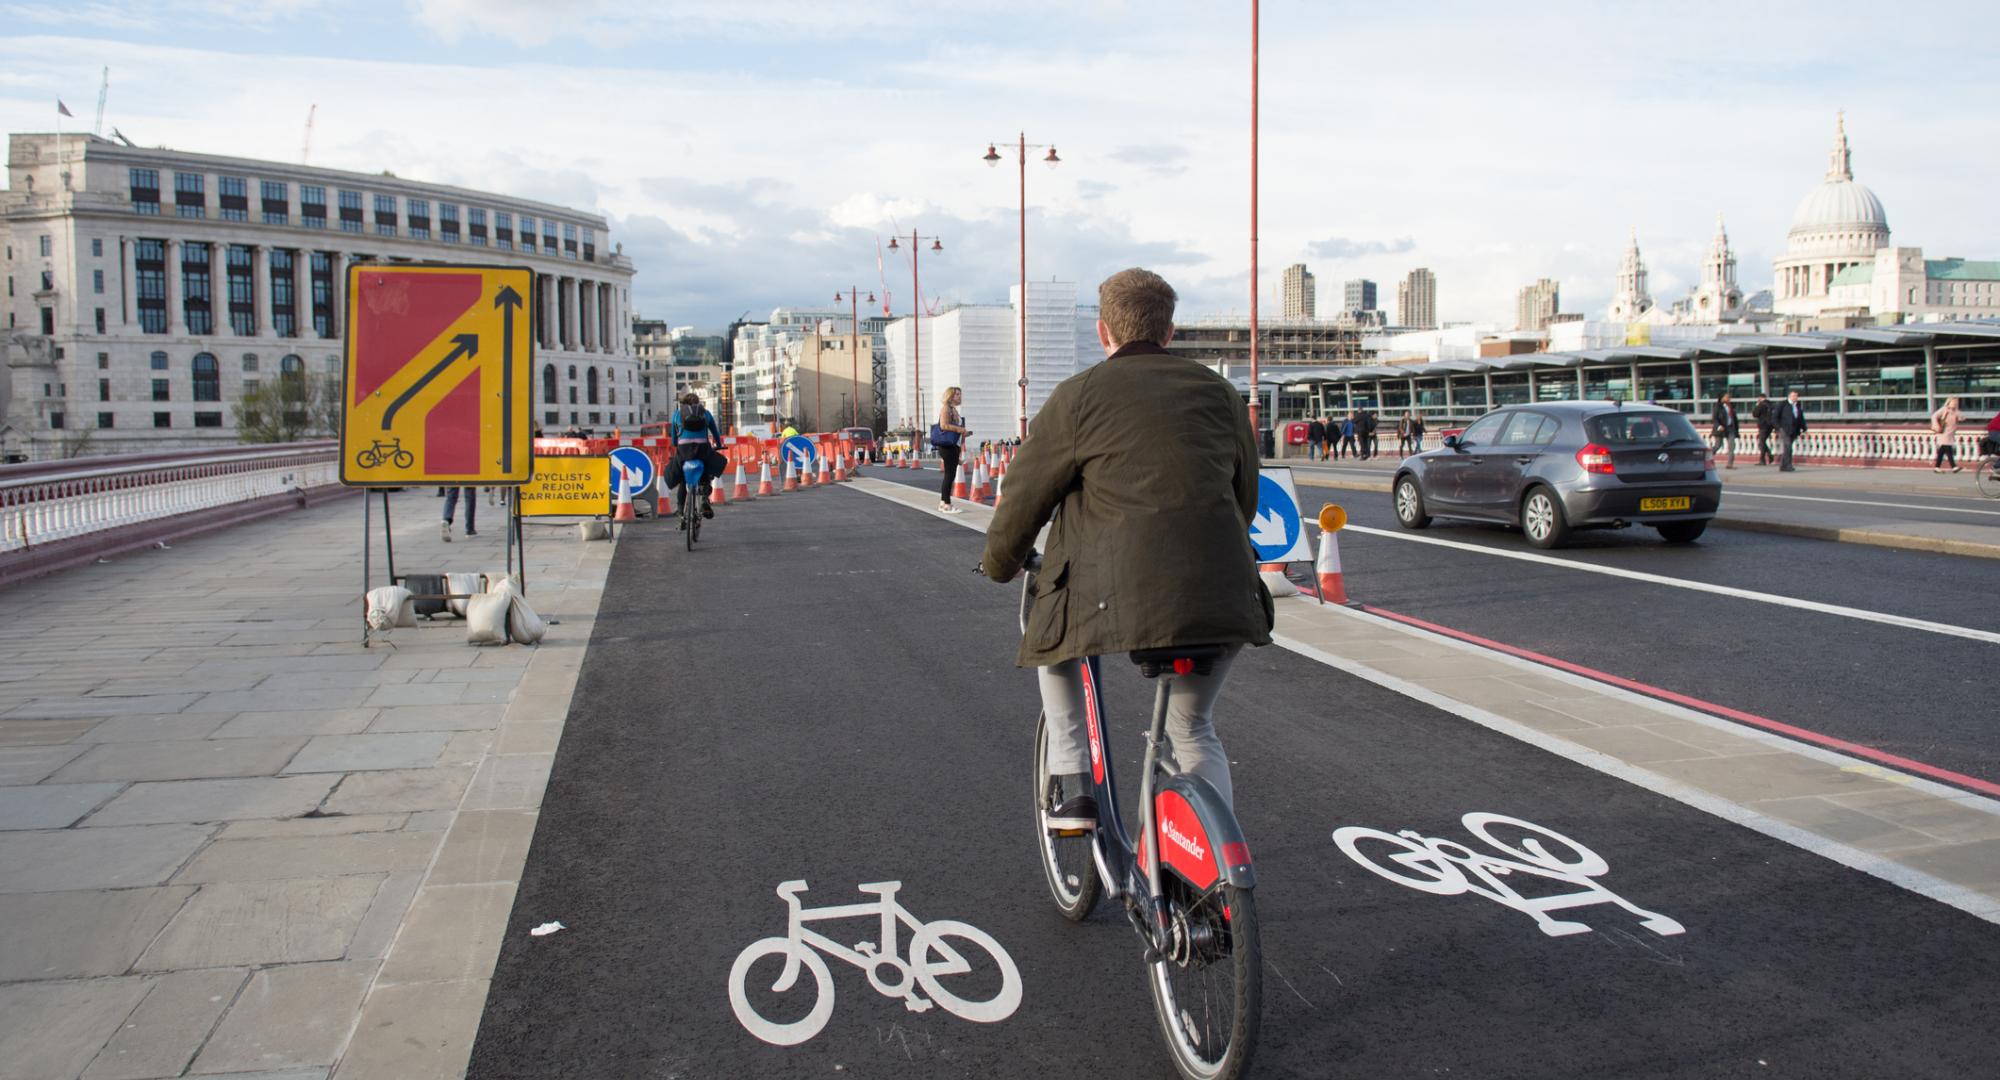 Cyclists using the new TfL Cycle Superhighway on Blackfriars Bridge in central London